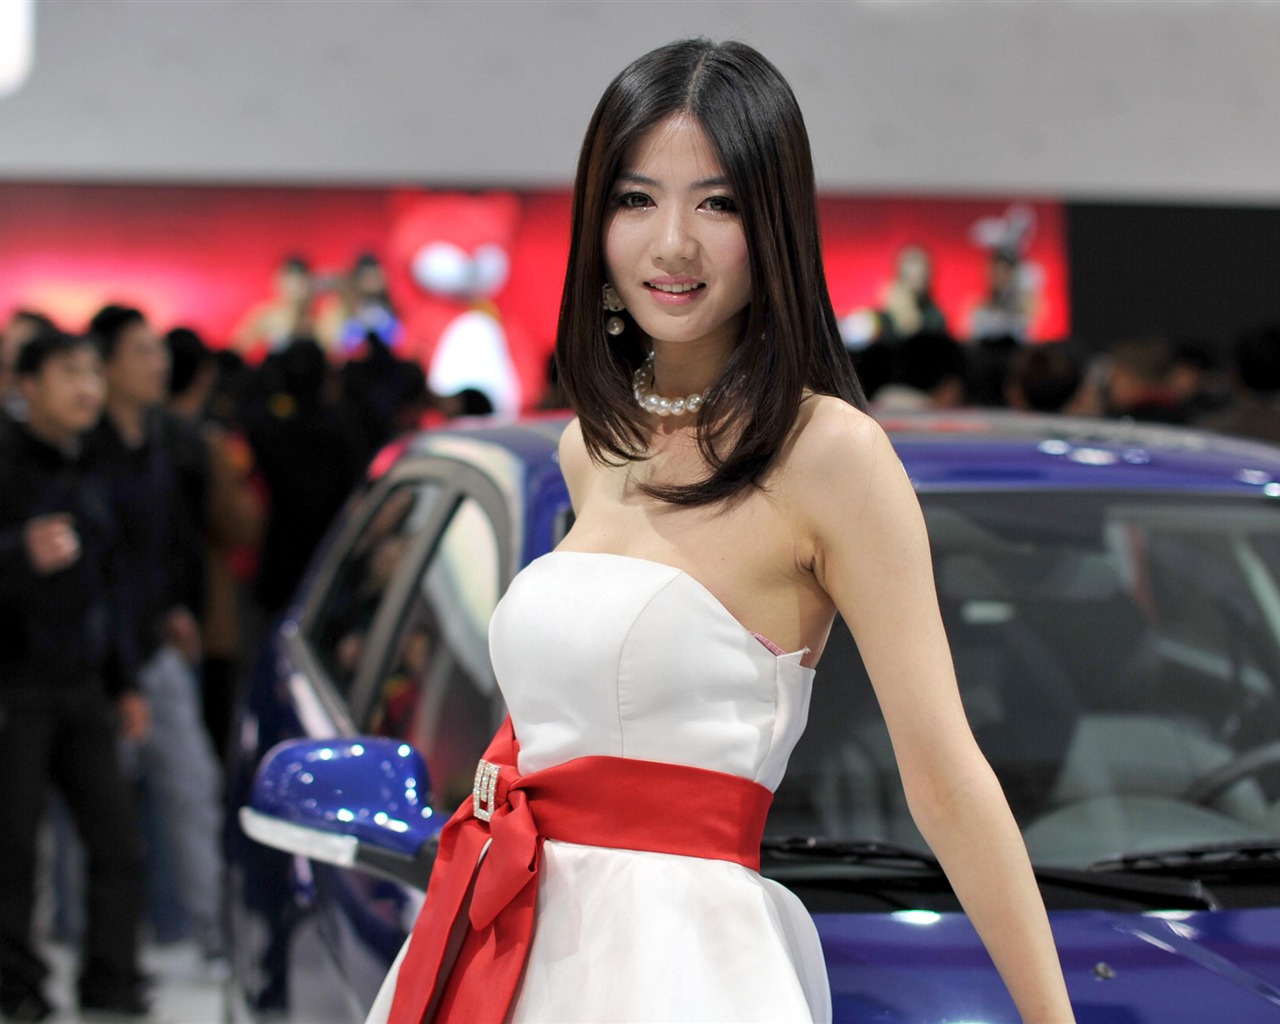 2010 Beijing Auto Show beauty (Kuei-east of the first works) #10 - 1280x1024